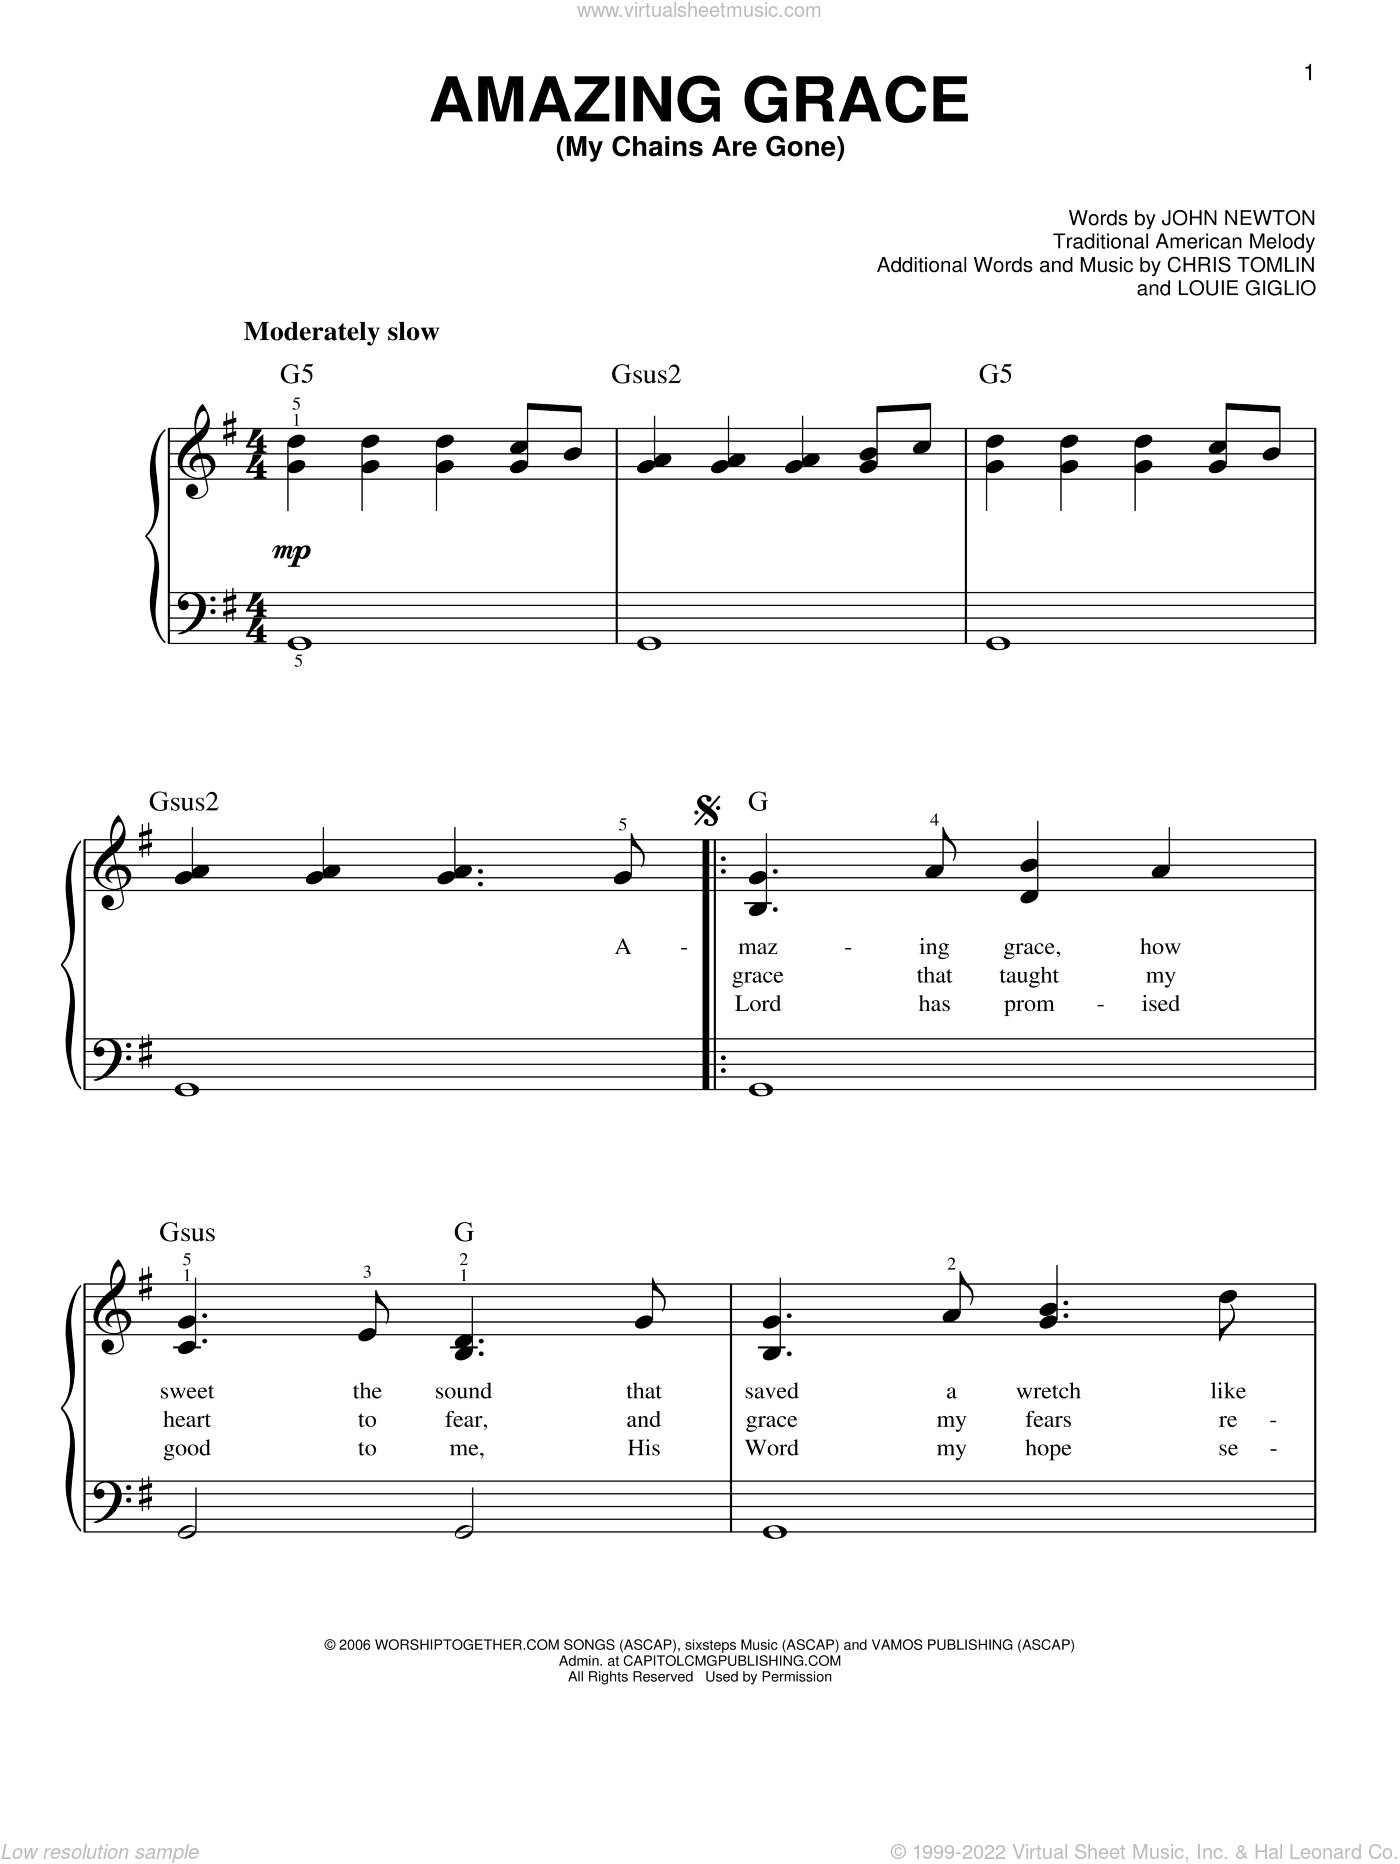 Tomlin - Amazing Grace (My Chains Are Gone), (easy) sheet music for